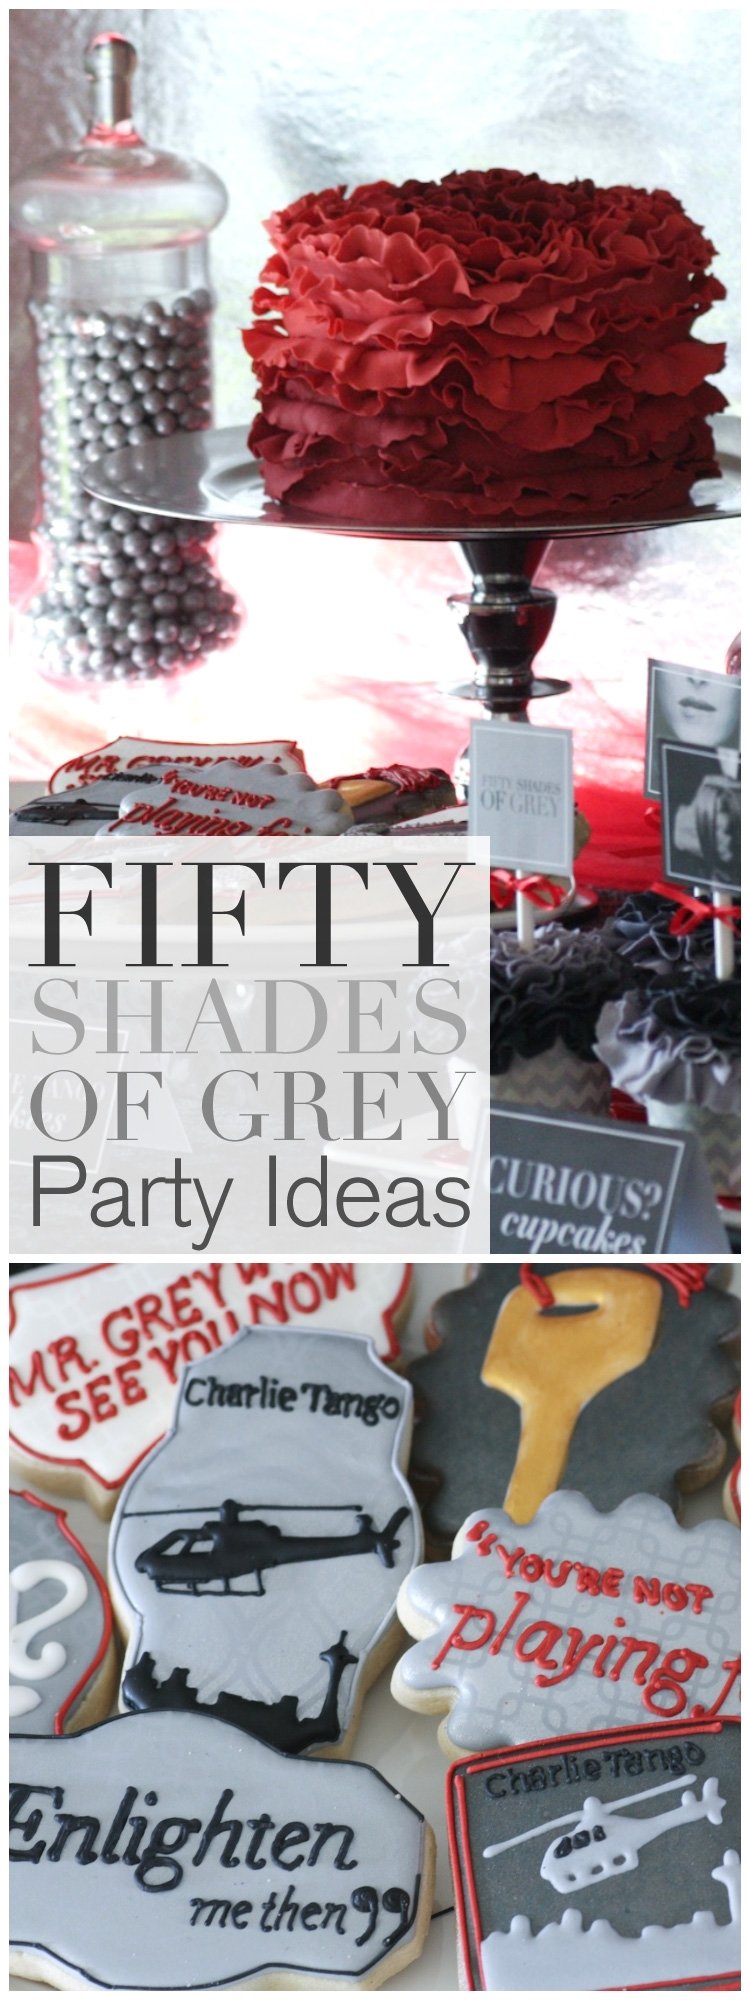 10 Elegant 50 Shades Of Grey Ideas For Couples how to host a fifty shades of grey ladies night party free 2022